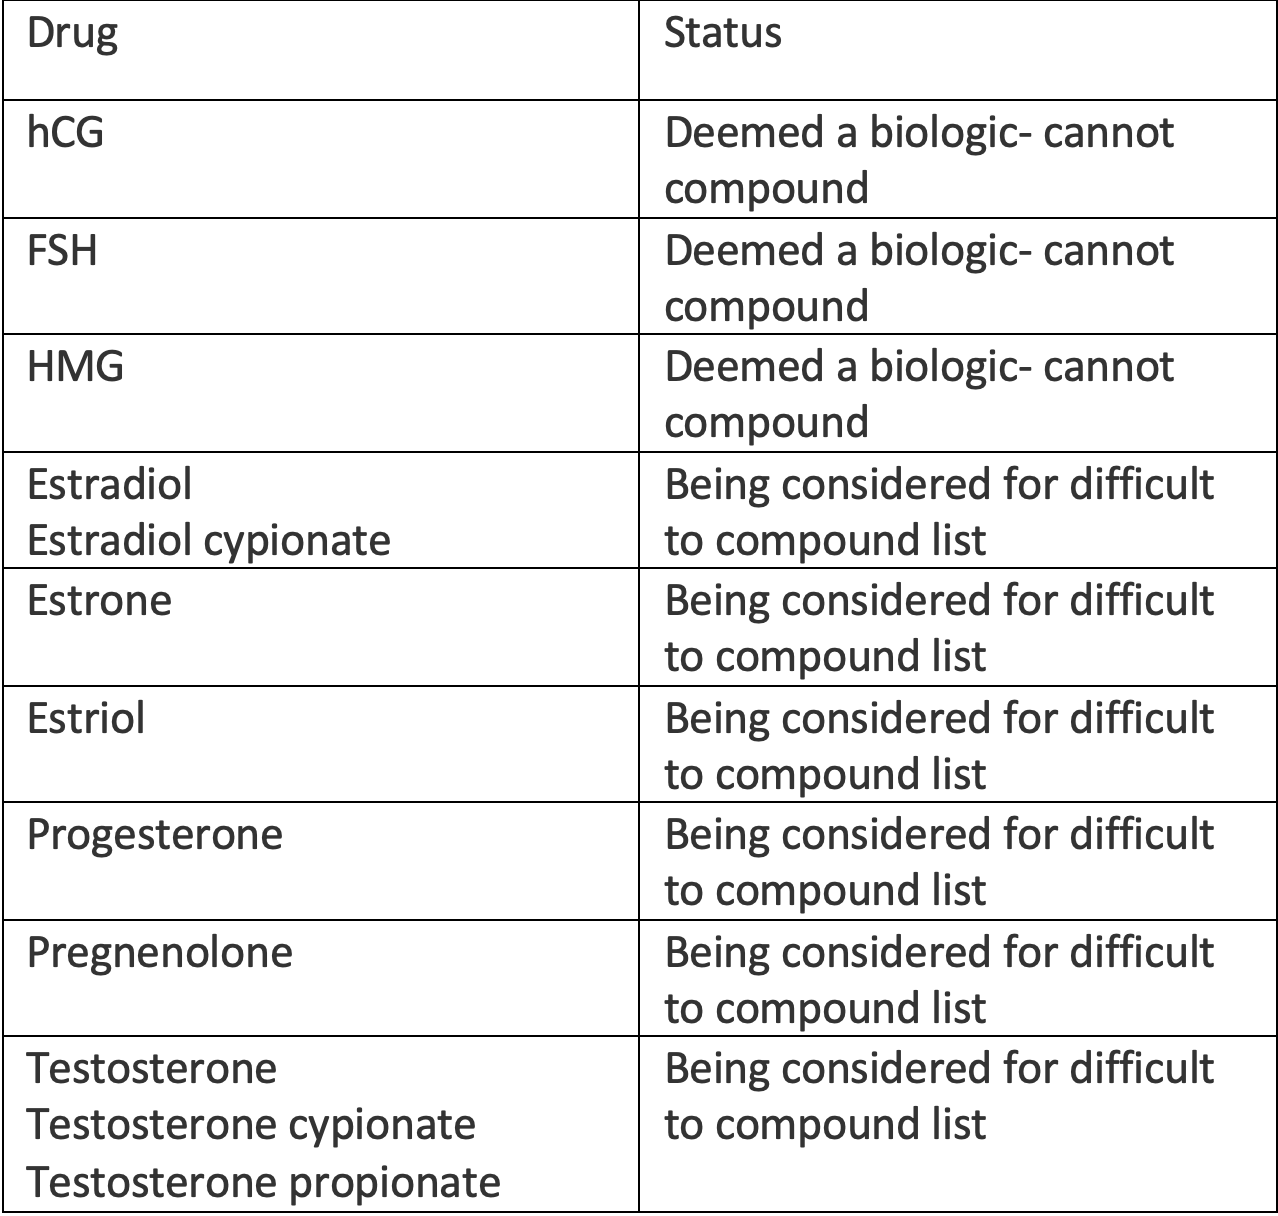 Table. Status of Hormone Compounding